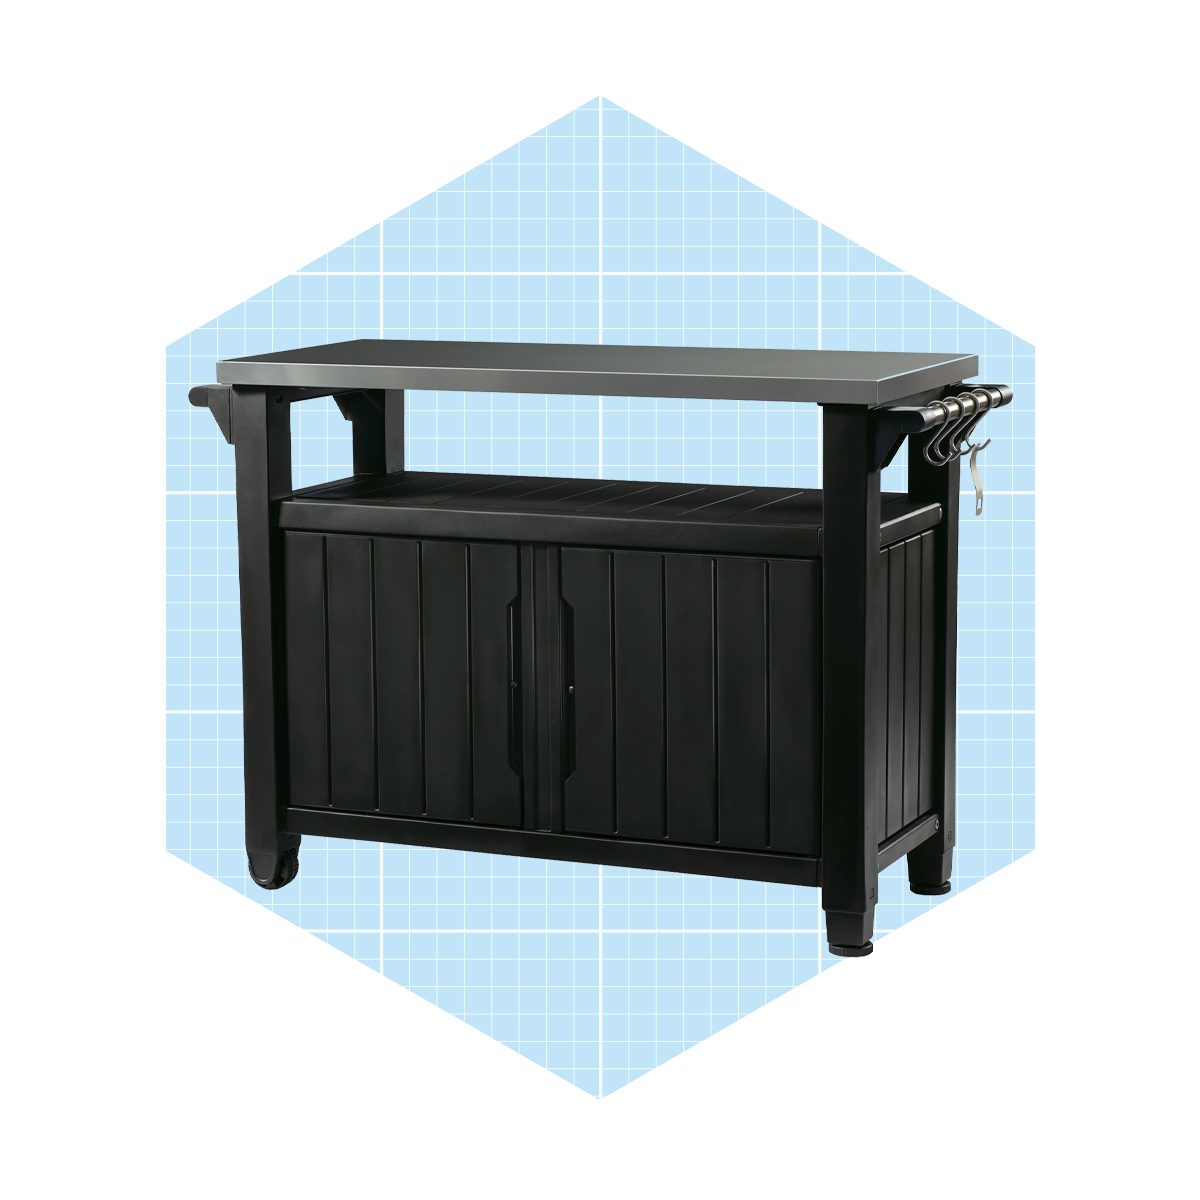 Keter Unity Xl Resin Serving Station All Weather Plastic And Metal Grill Storage And Prep Table Ecomm Walmart.com